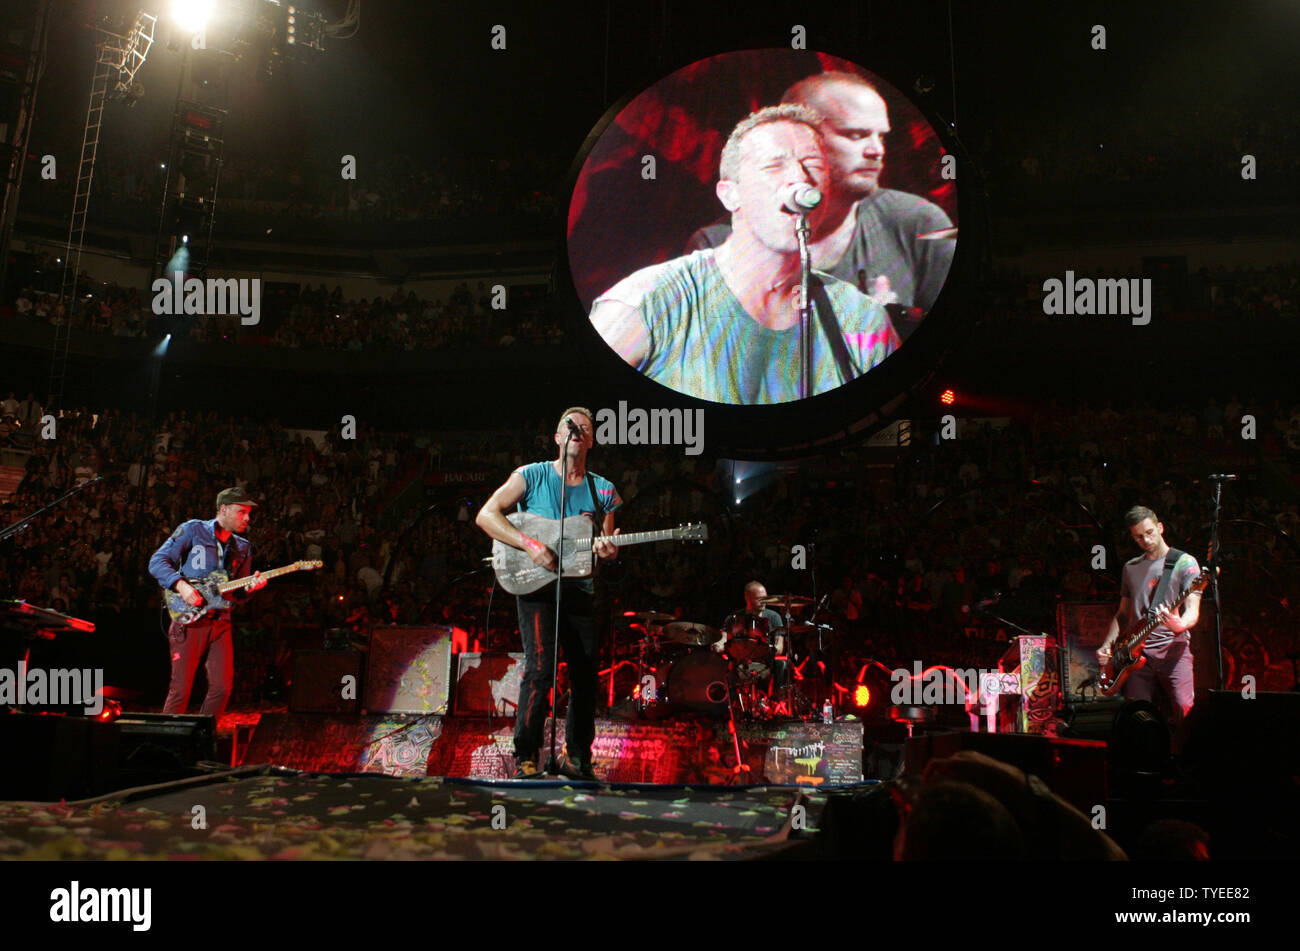 Coldplay performs in concert on their Mylo Xyloto tour 2012 at the American Airlines Arena in Miami on June 29, 2012. UPI/Michael Bush Stock Photo